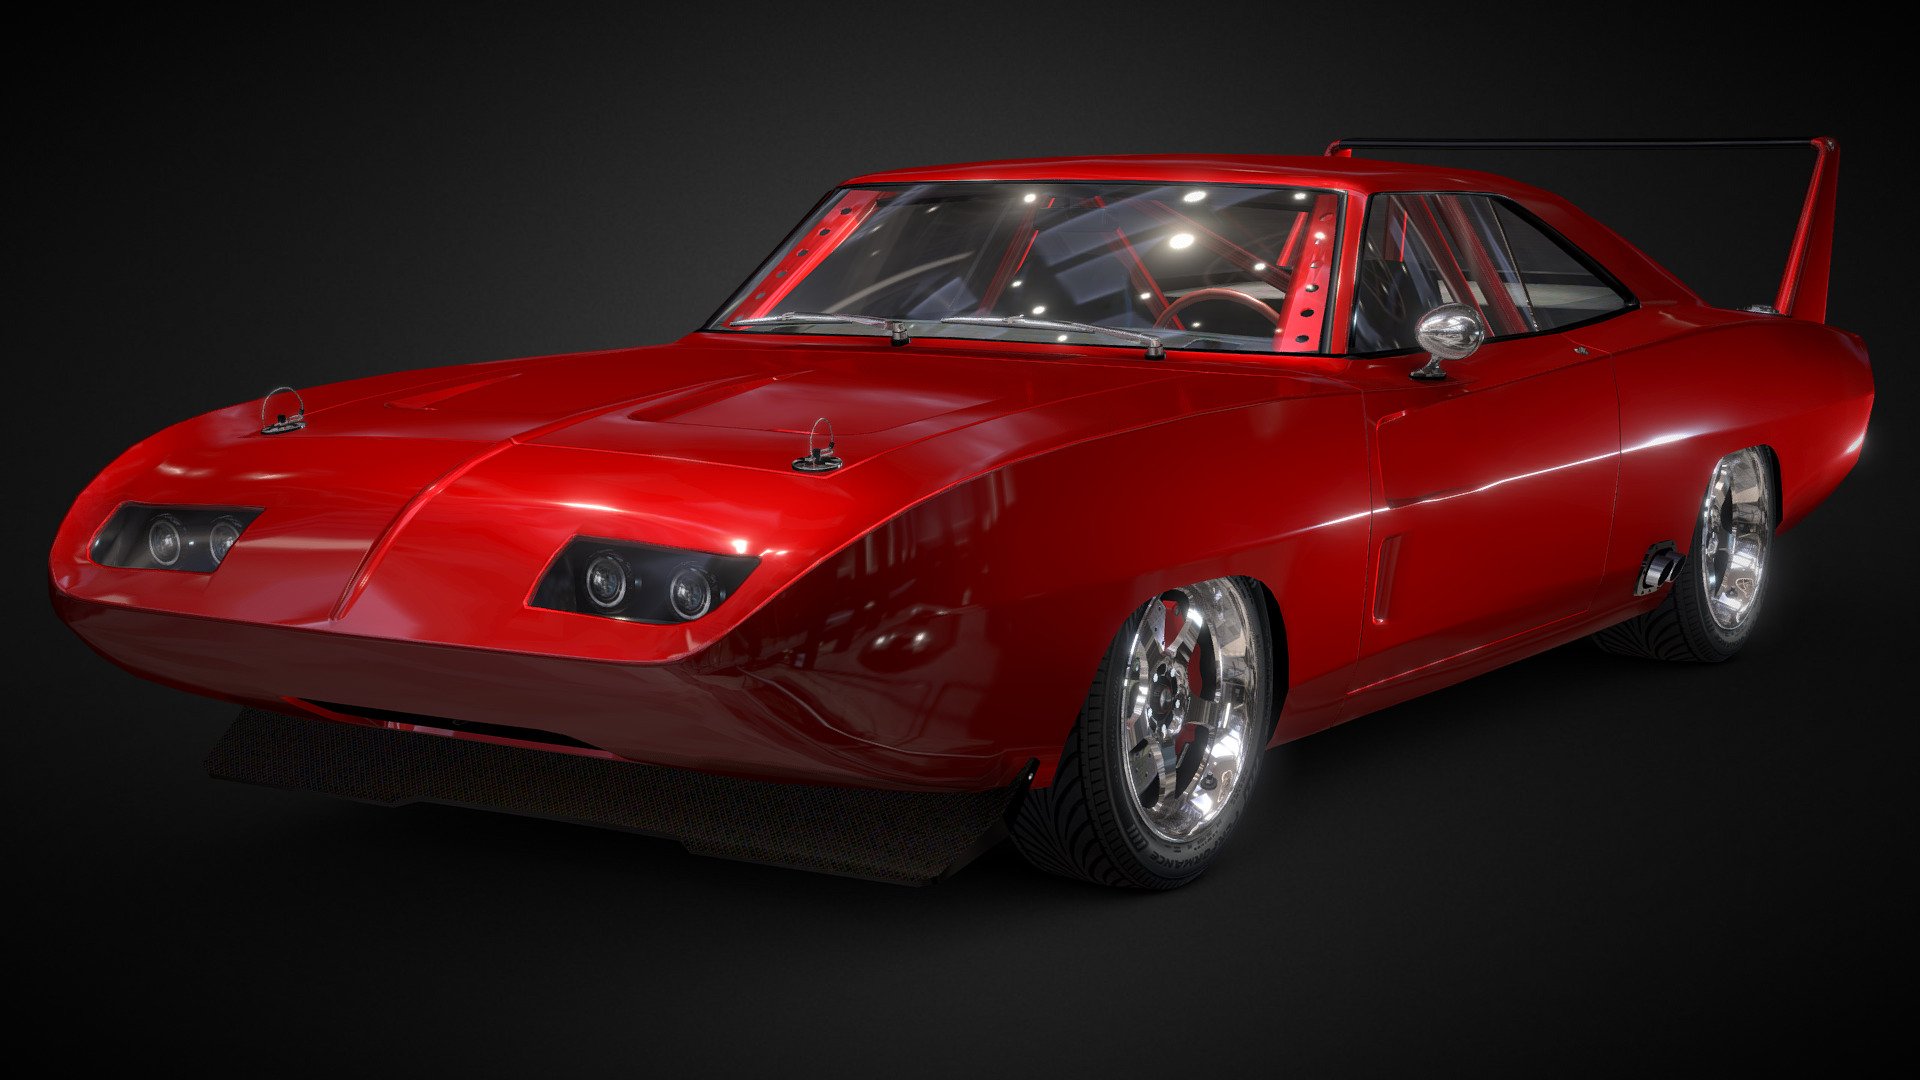 ALLOWED use this model -

for games.

visual and art projects.

presentations.

(with showing my credits)



FORBIDDEN -

sell.

make a profit with it.

assign their authorship.

upload on other sites.

reupload on SketchFab.




Based on model - Fast'n'Furious: 6 The Game

Parts from - Forza Horizon 2, Forza Motorsport 4, NFS Shift, Project CARS

Polycount - midpoly with some hd details

Geometry edited and modified - Alex.Ka.

Textures - Fast'n'Furious 6 The Game, NFSMW, NFS Shift, Alex.Ka.



Features

= Special windows with correct real time reflections effect

= Correct mirrors reflection with special wet texture effect

= Individual texture for front window  (With the ability to add a decal - need edit)

= Individual texture for rear window  (With the ability to add a decal - need edit)

= Special &ldquo;Douglas